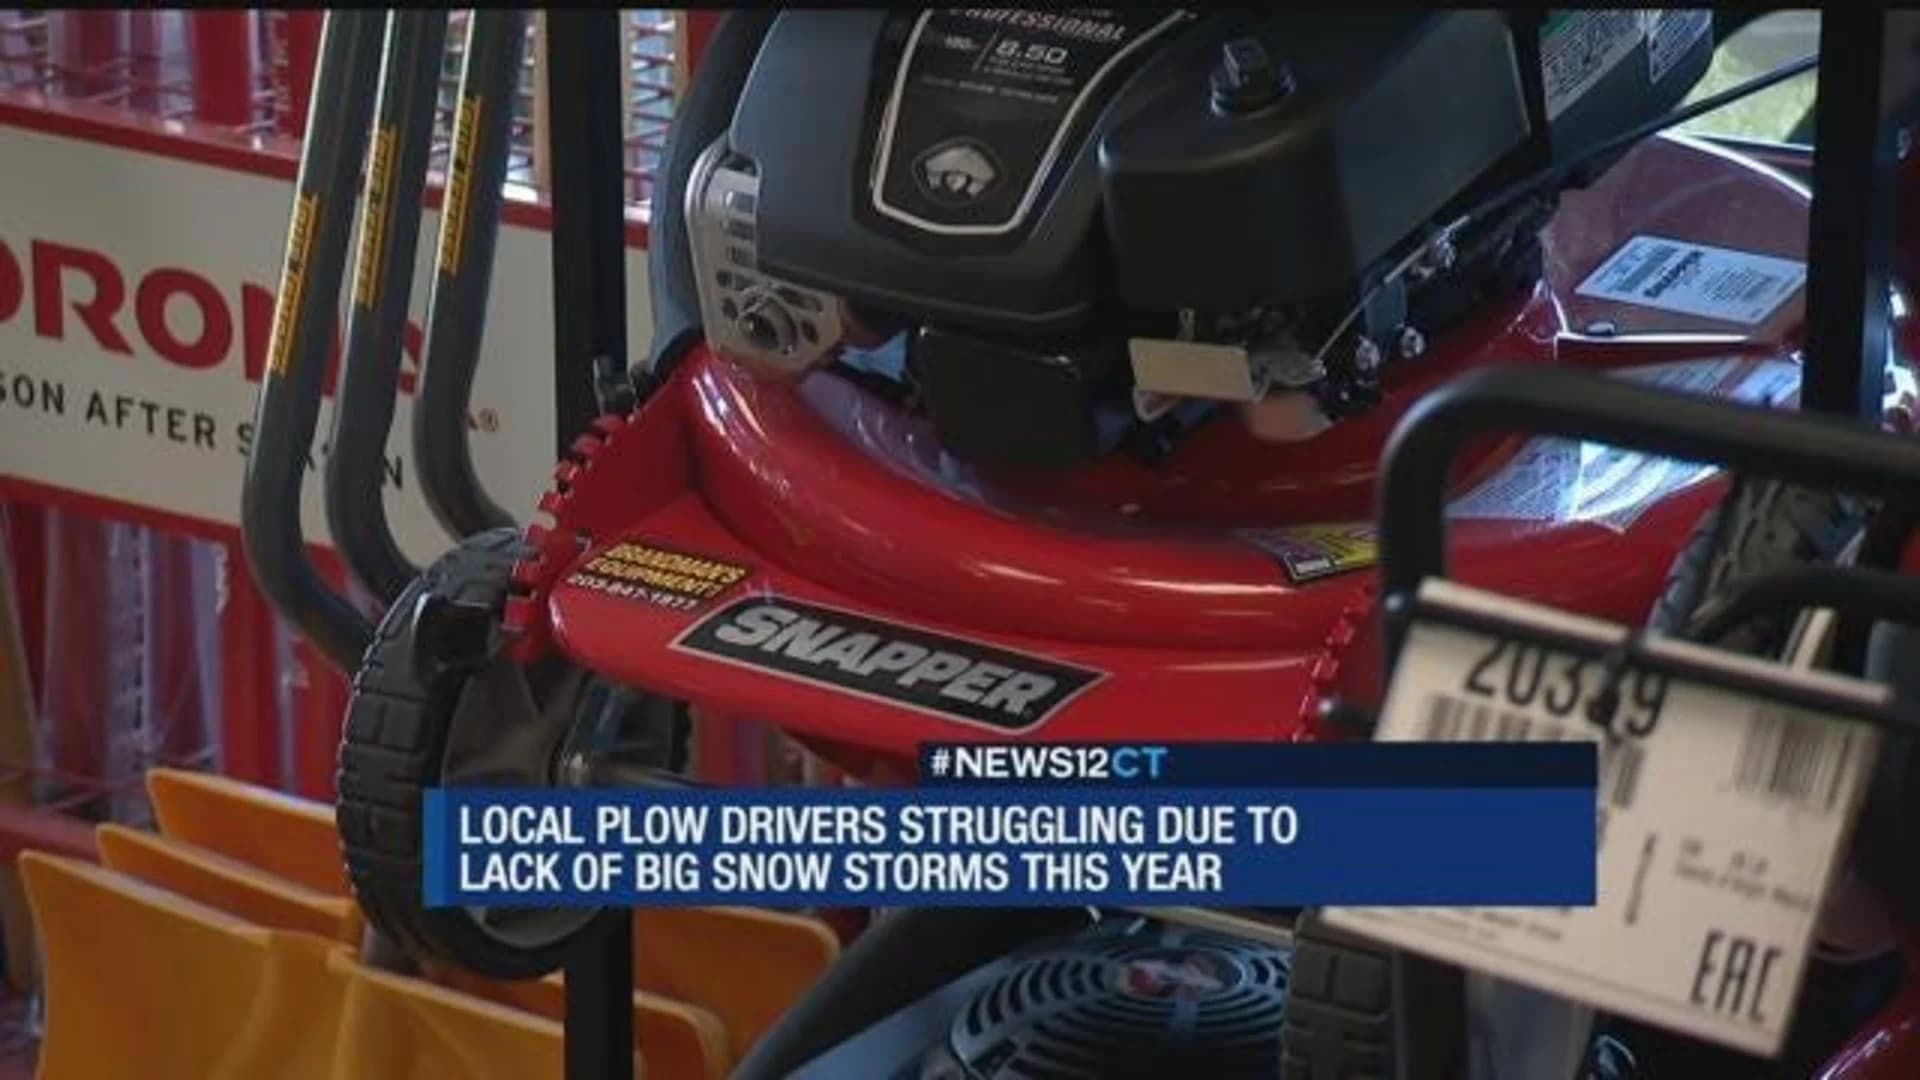 Snowplow drivers, supply stores struggle due to light winter